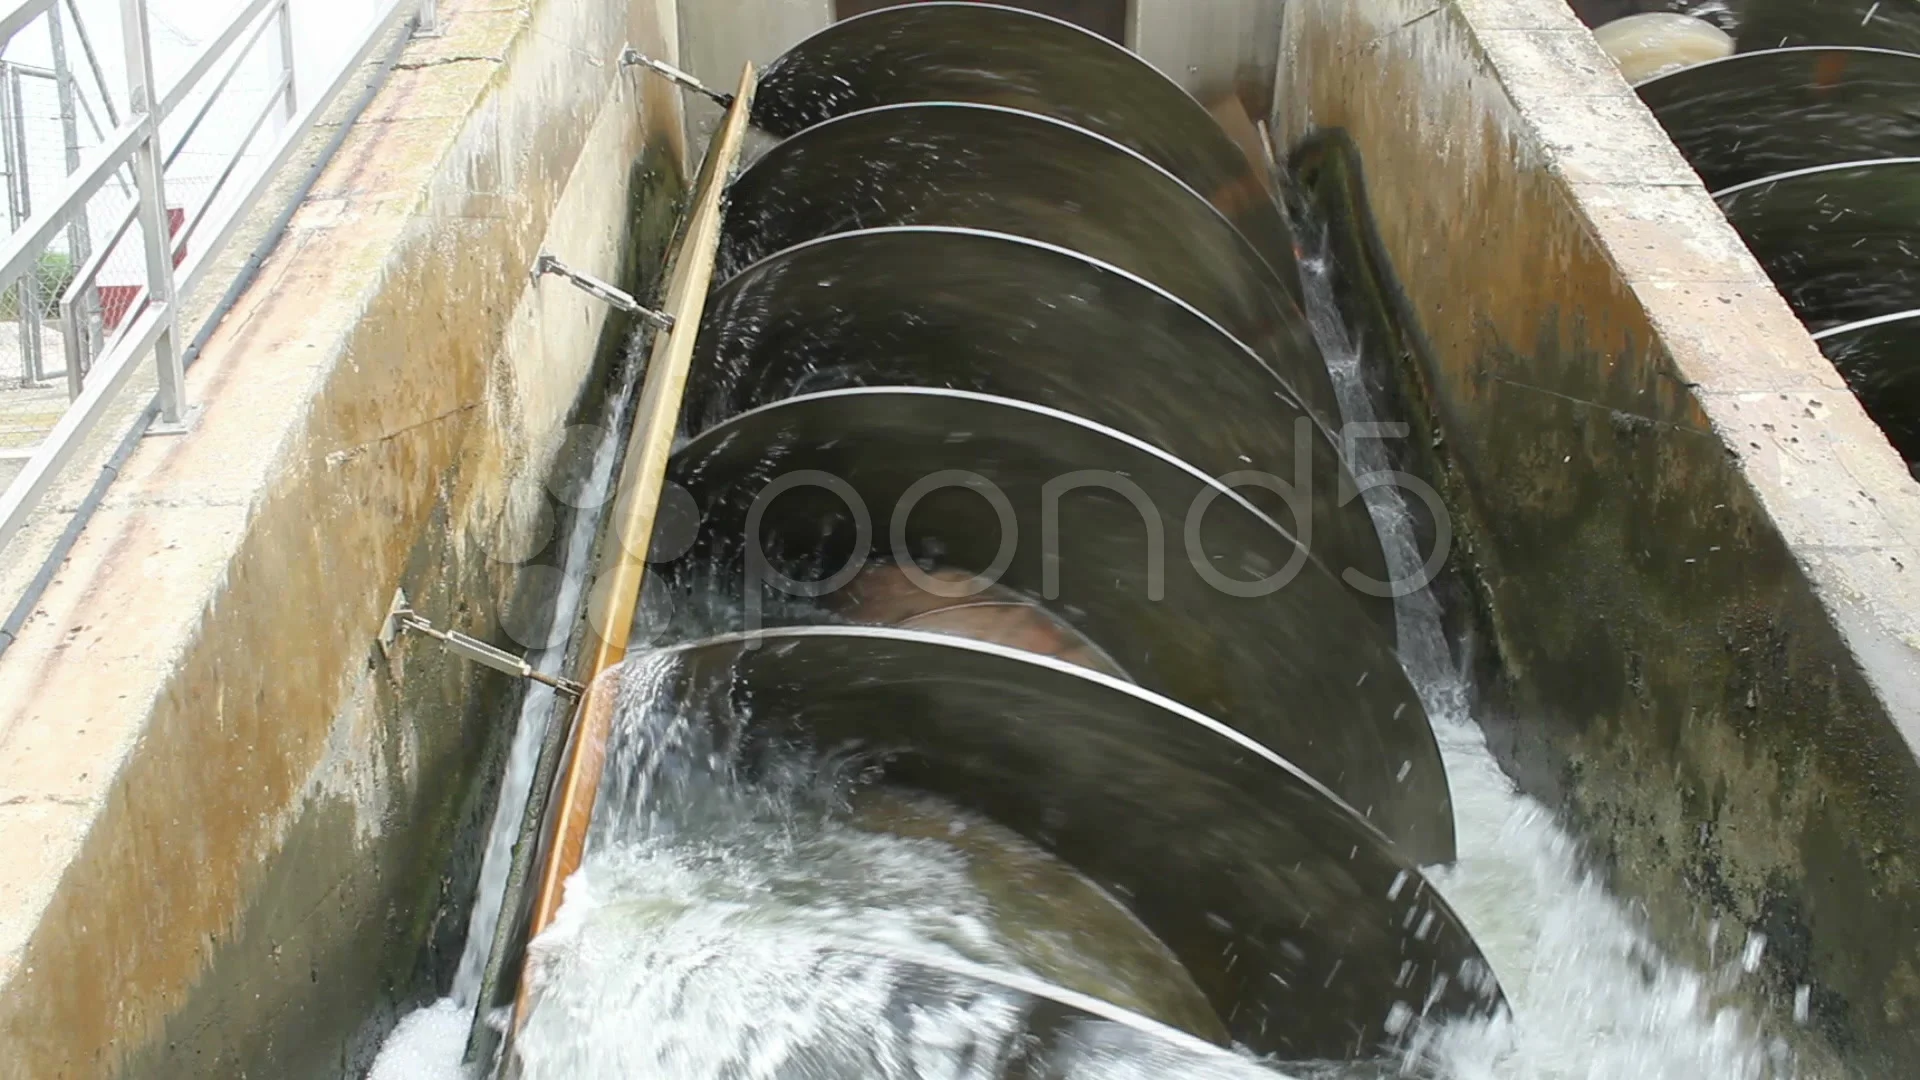 Archimedes screw pump. Helical water pum... | Stock Video | Pond5